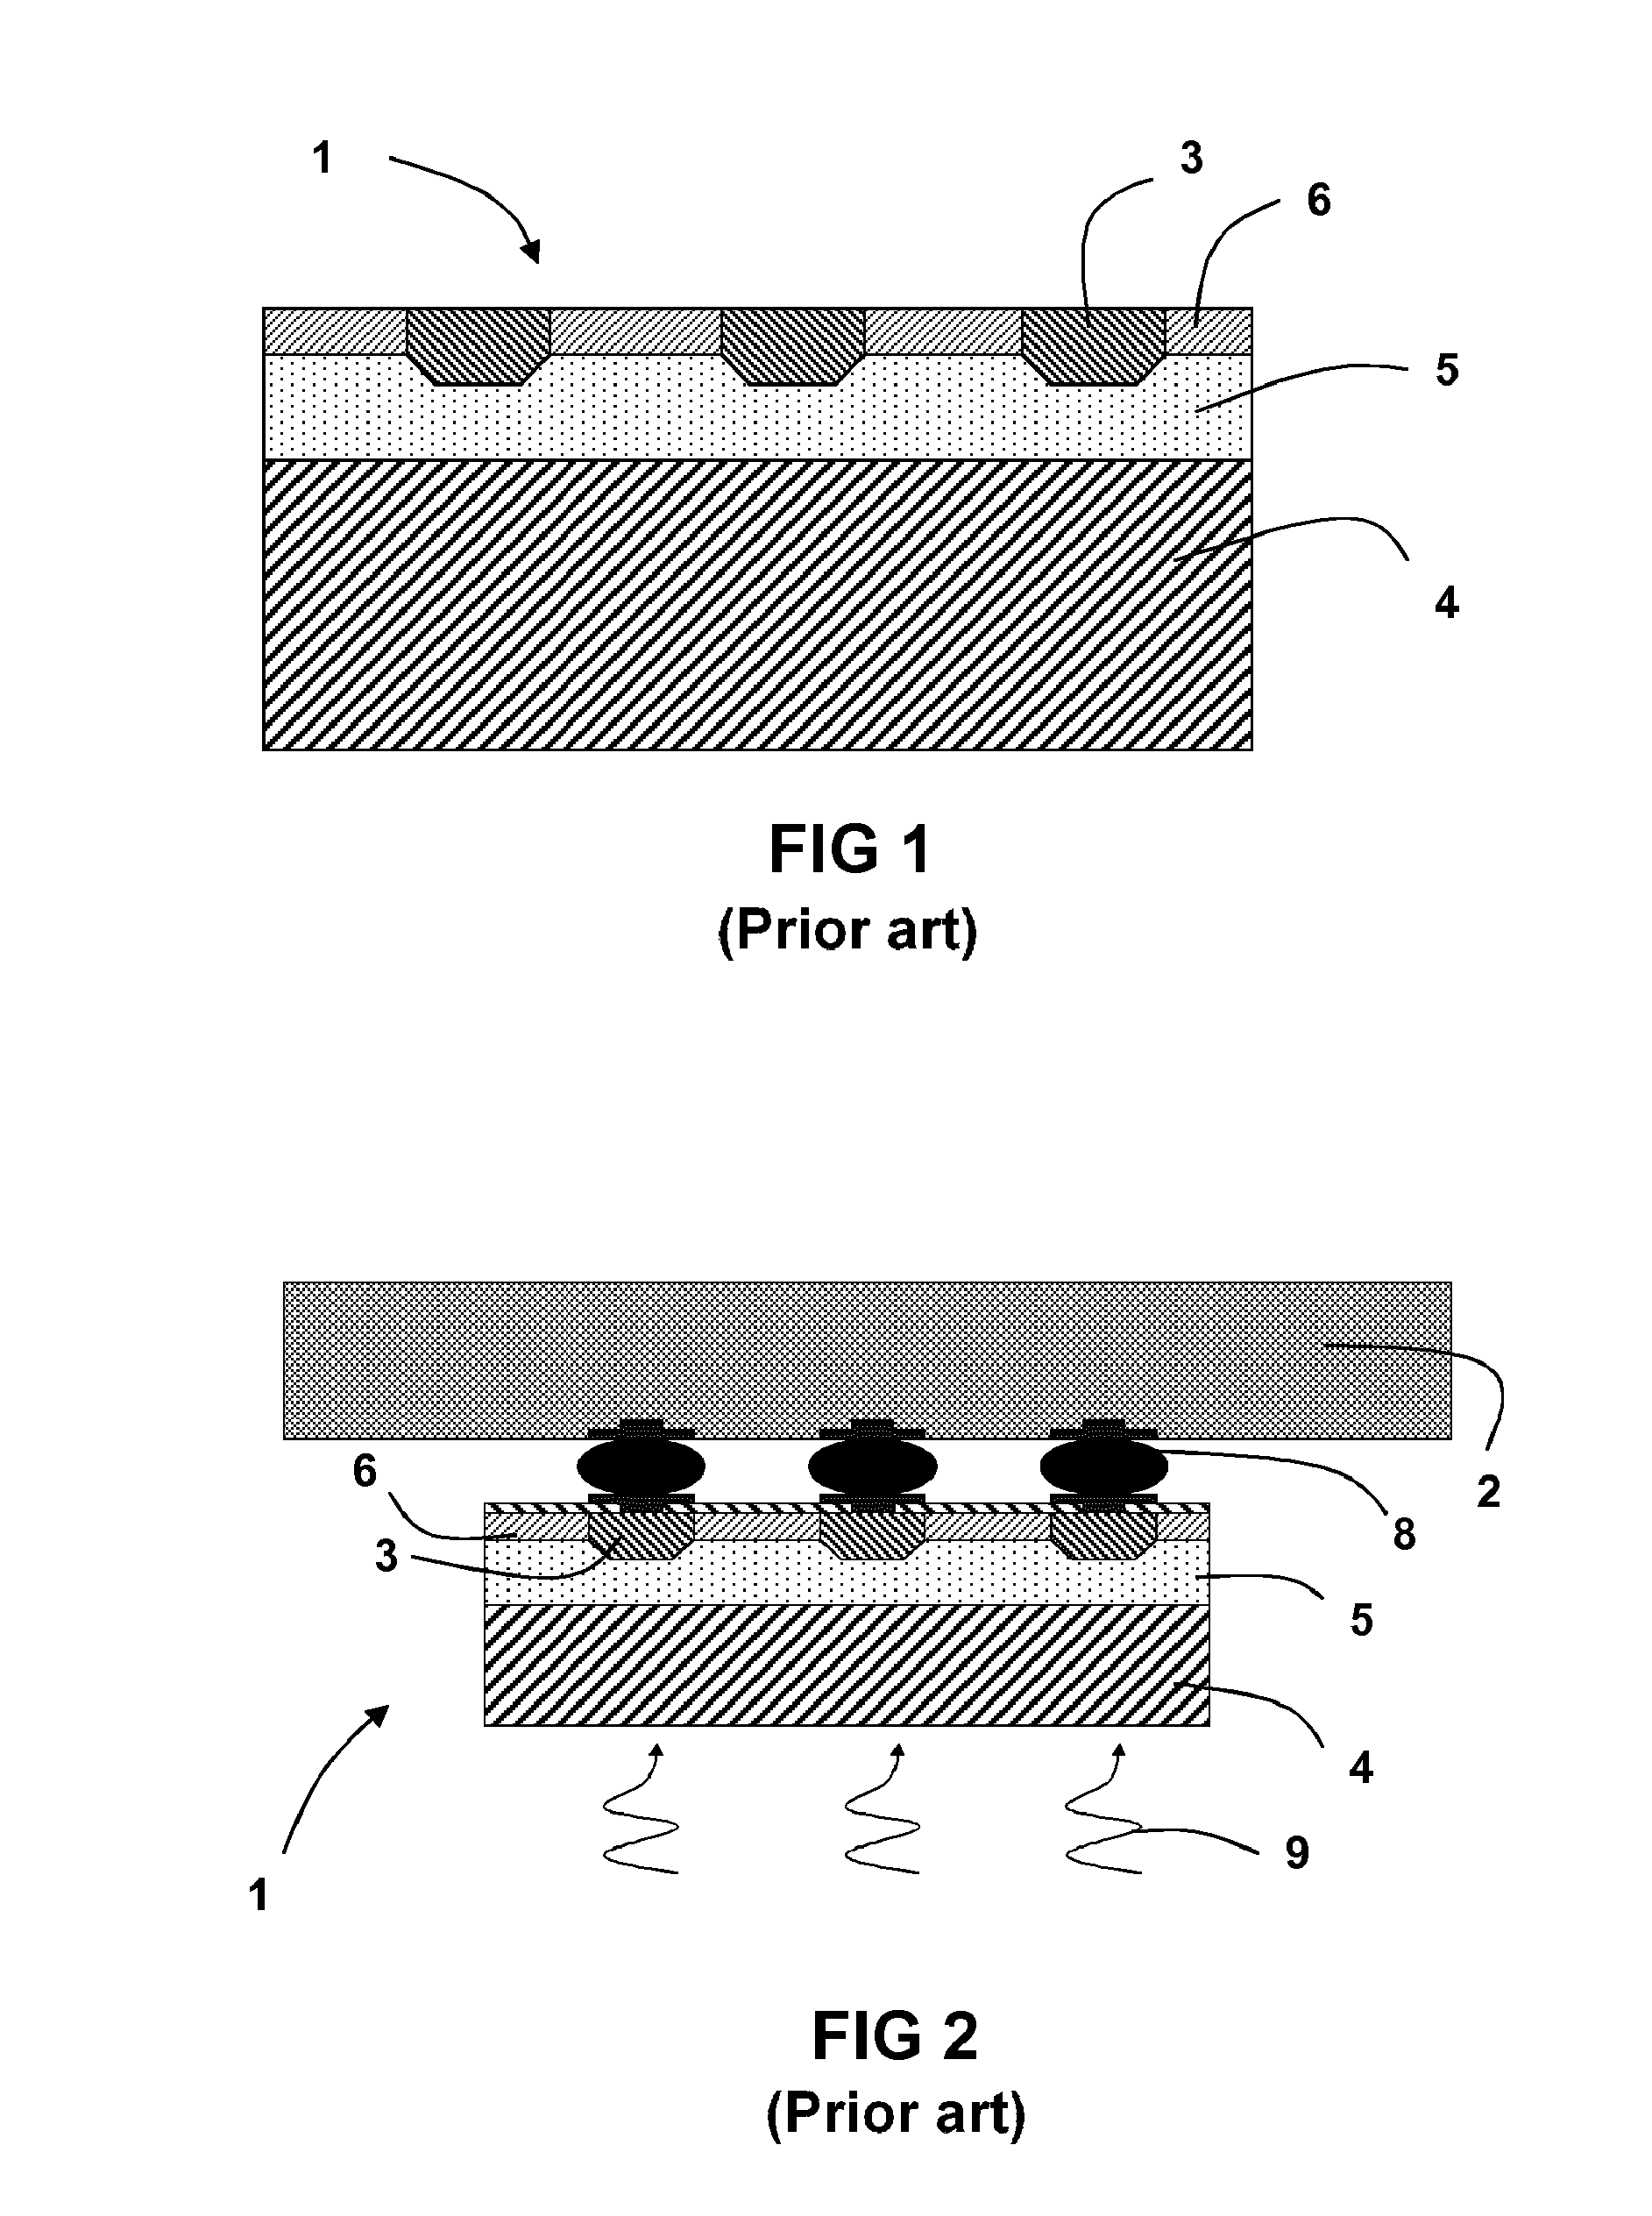 Photodiode array having a charge-absorbing doped region